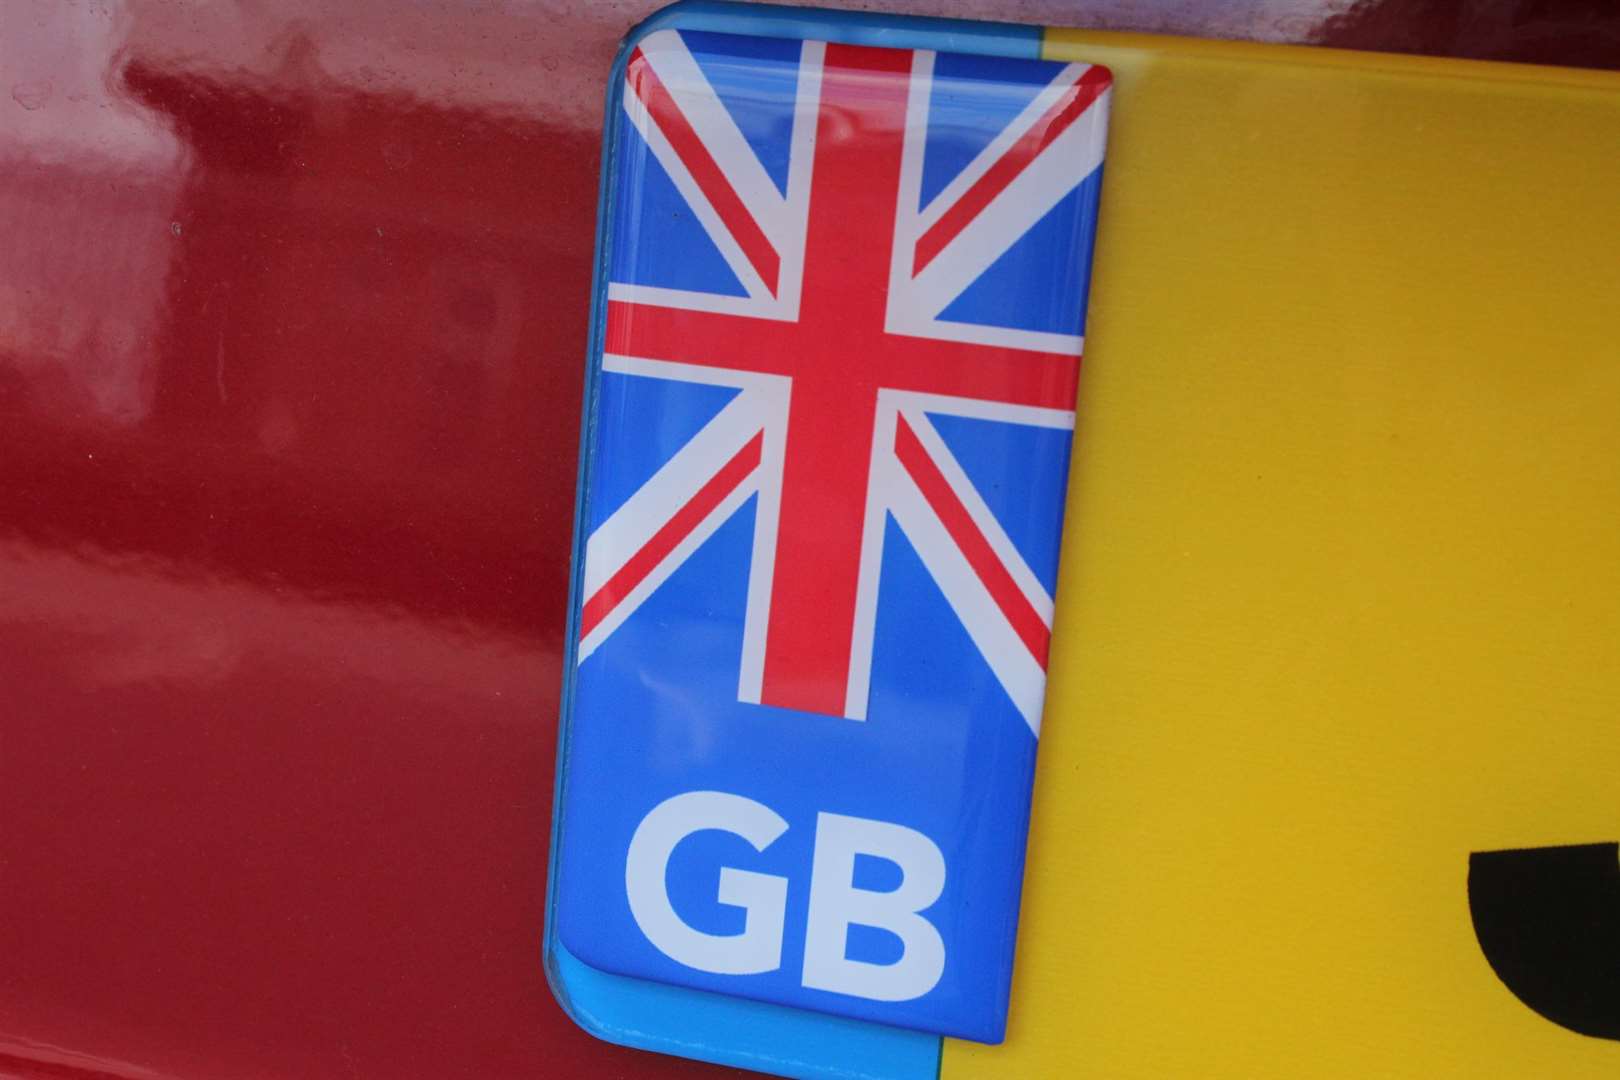 The old GB style number plate is also being replaced with a UK version